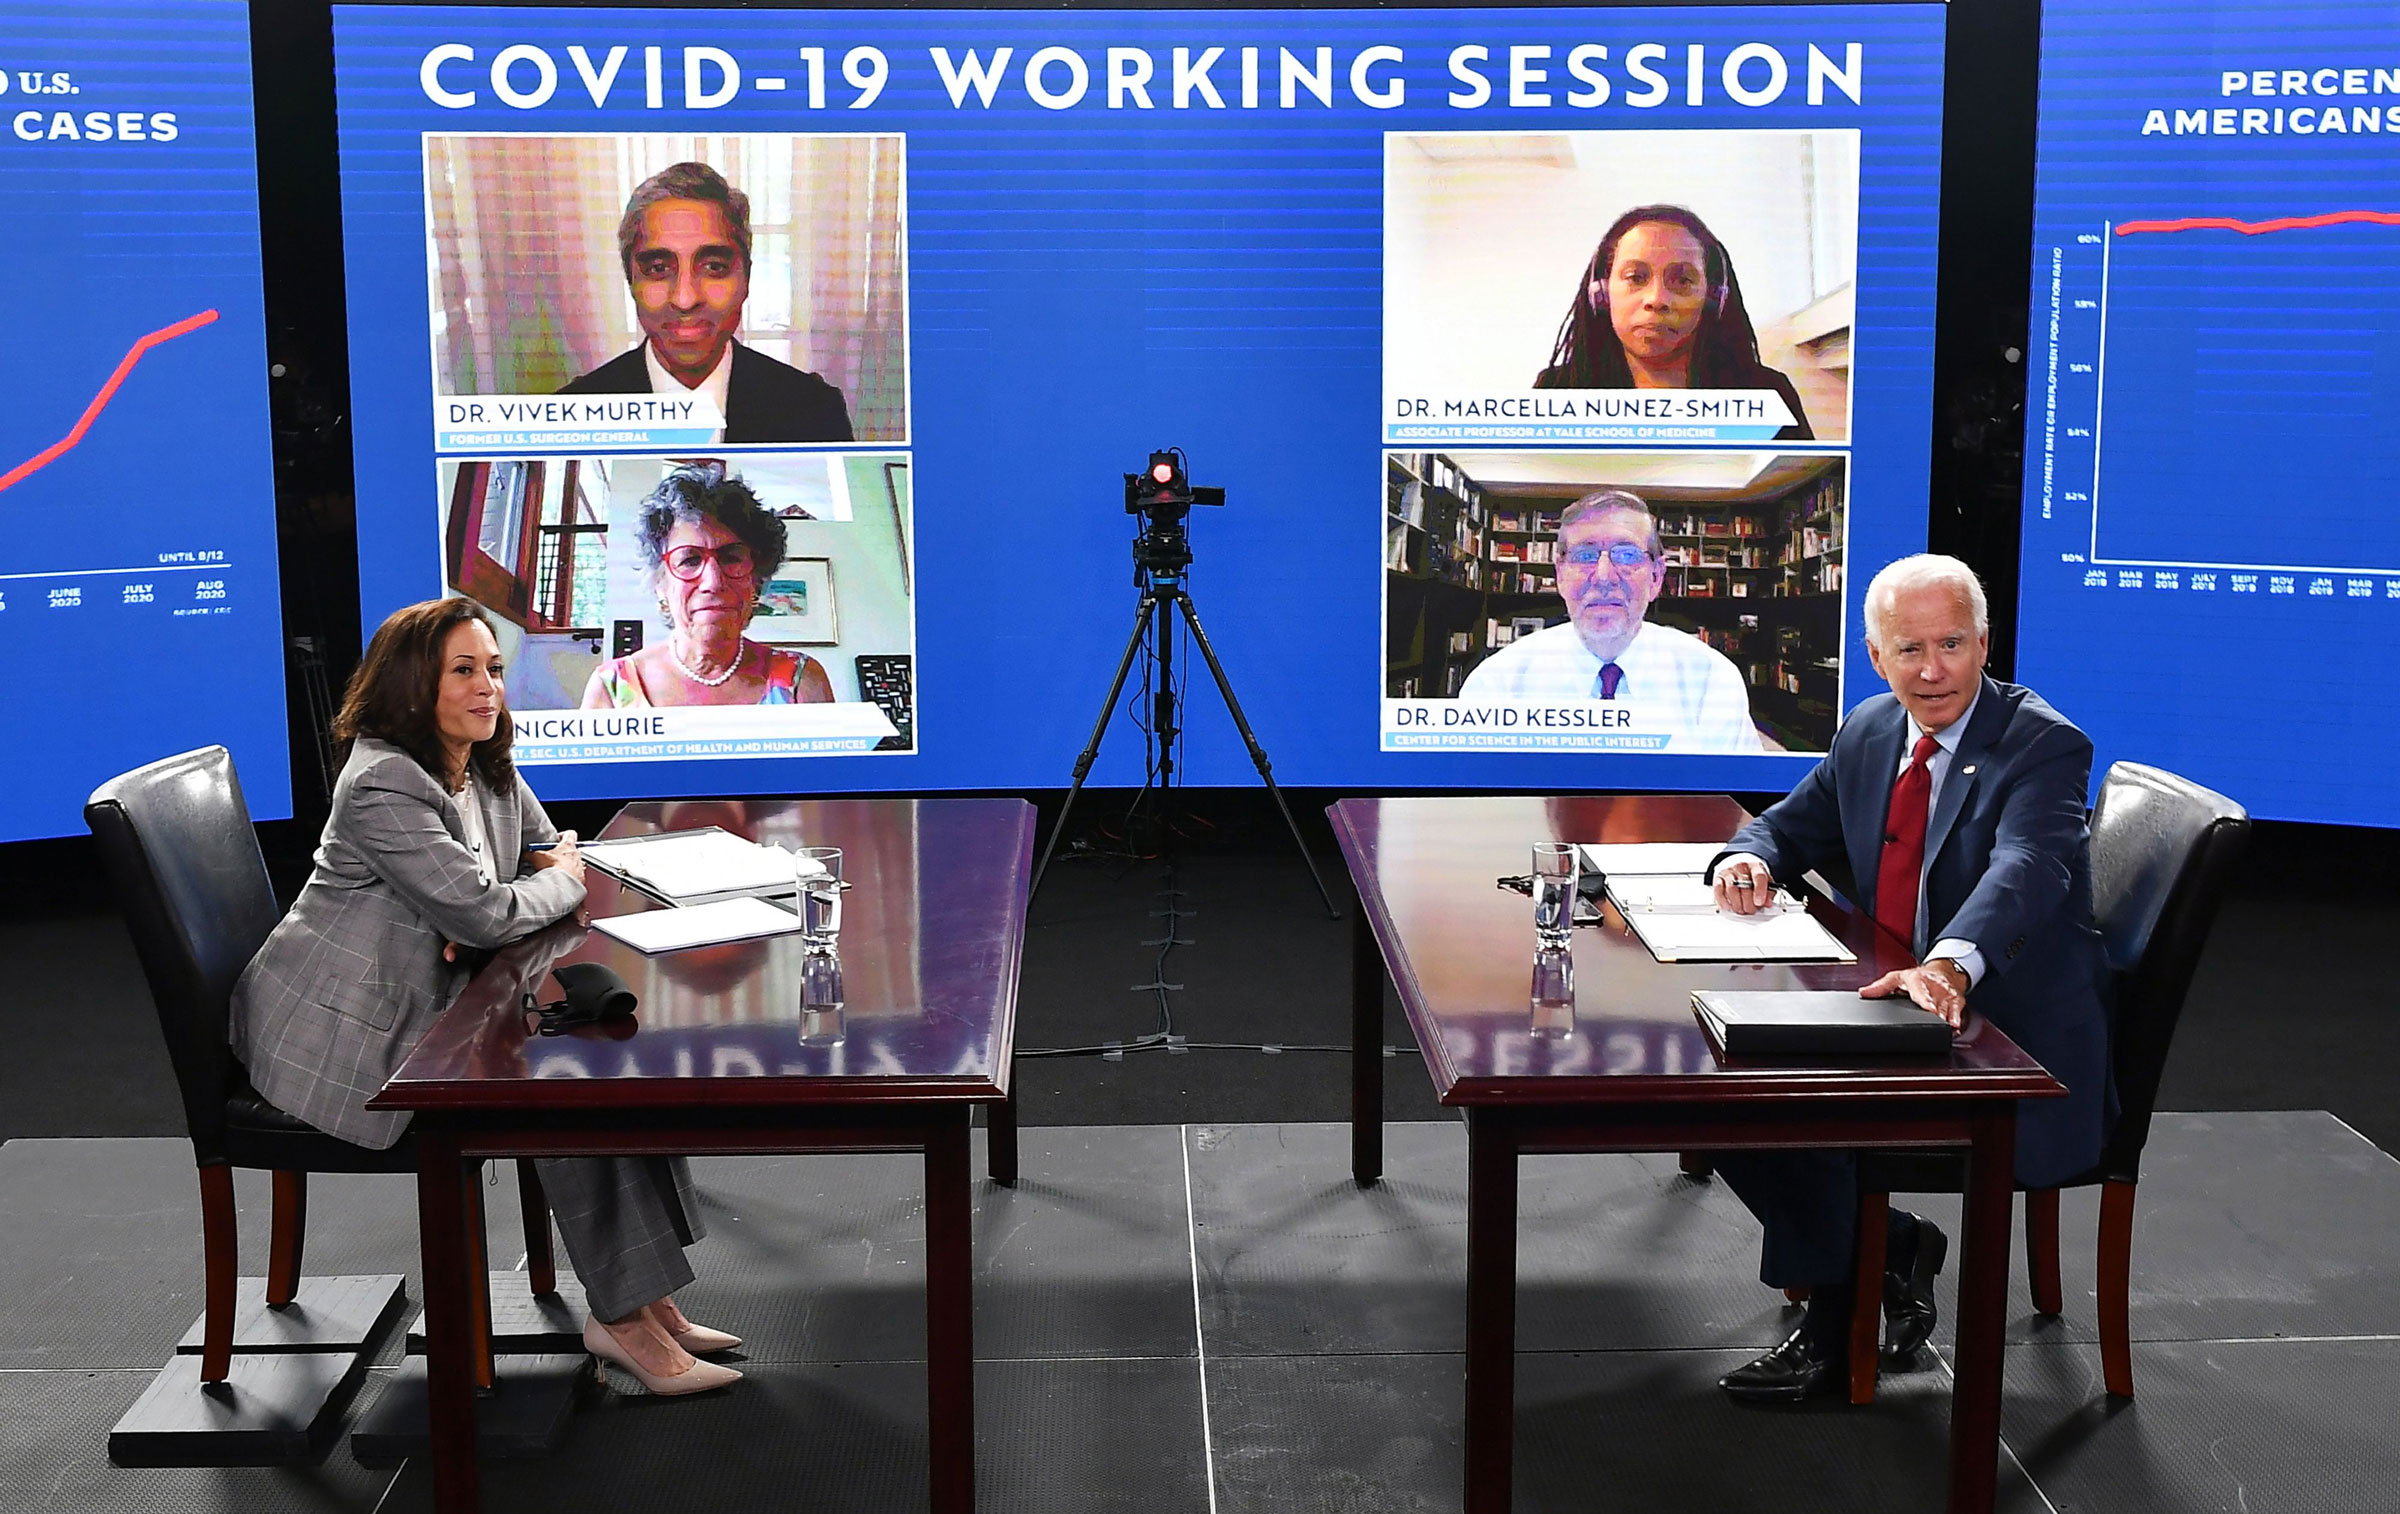 Joe Biden and his running mate, US Sen. Kamala Harris, are briefed by health experts on Thursday.